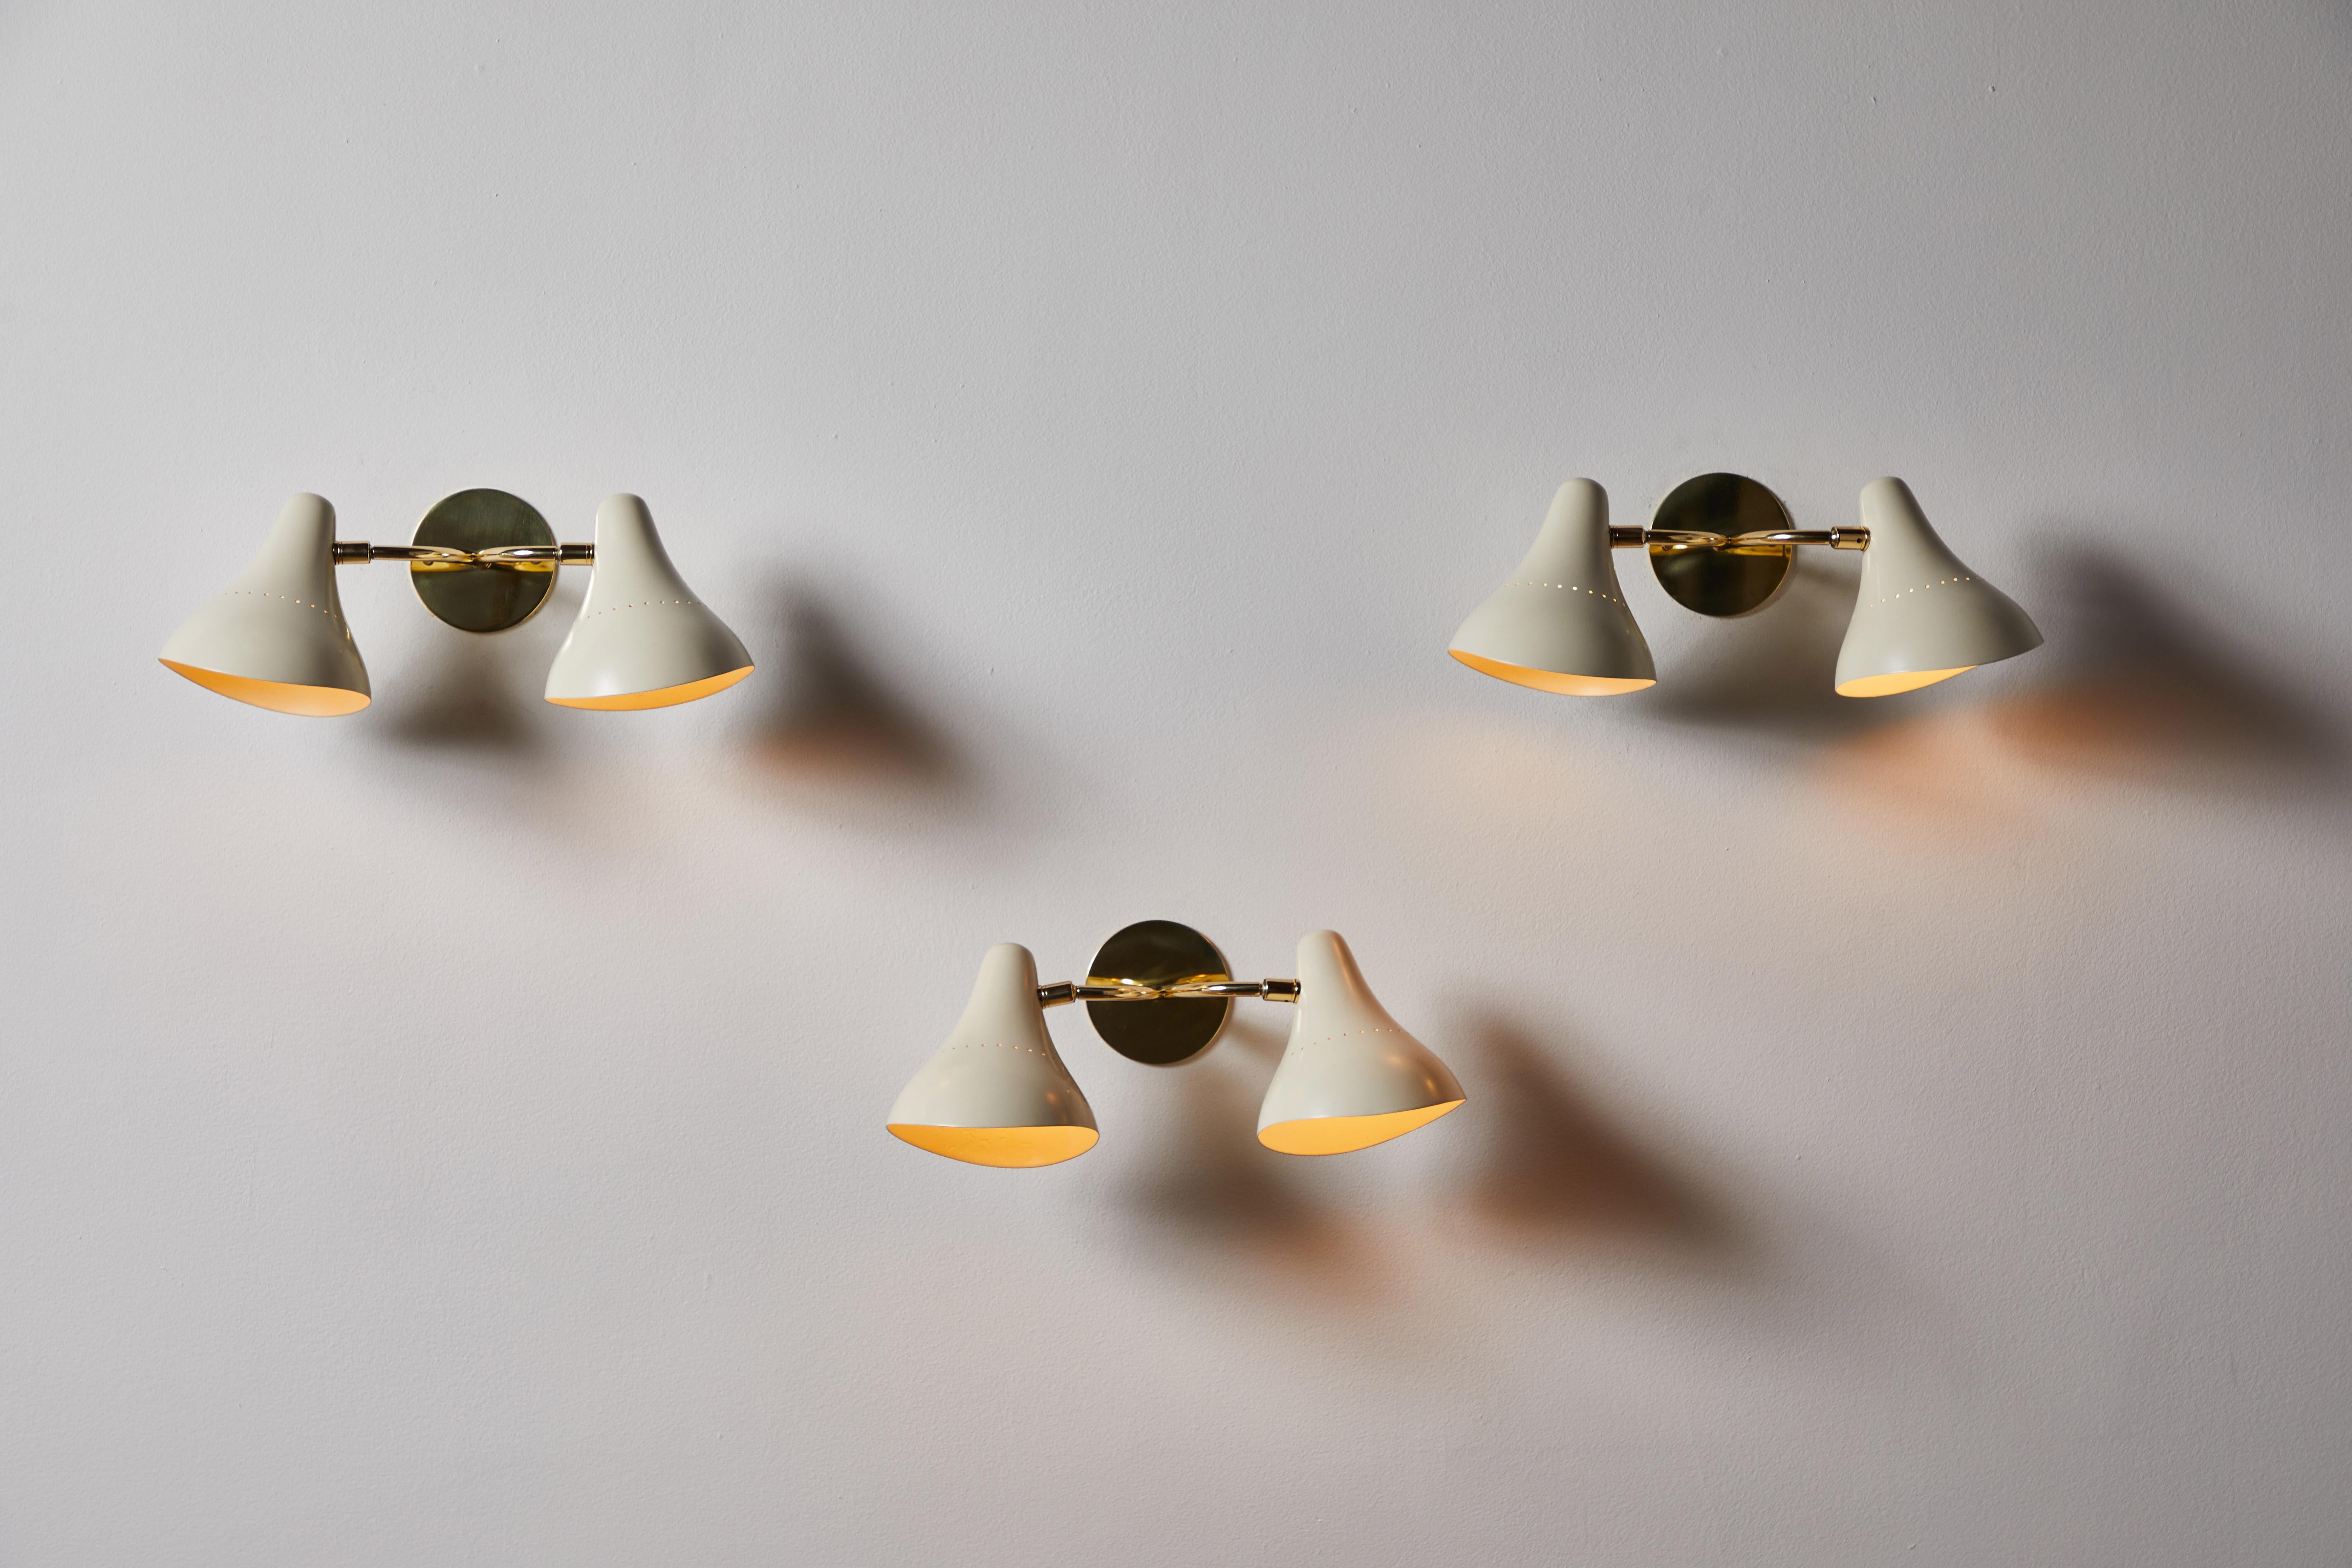 Two sconces by Giuseppi Ostuni for Oluce. Designed and manufactured in Italy, circa 1950s. Enameled metal, brass. Custom brass backplate. Shades articulate in various positions. Rewired for U.S. standards. We recommend one E27 100w maximum bulb per